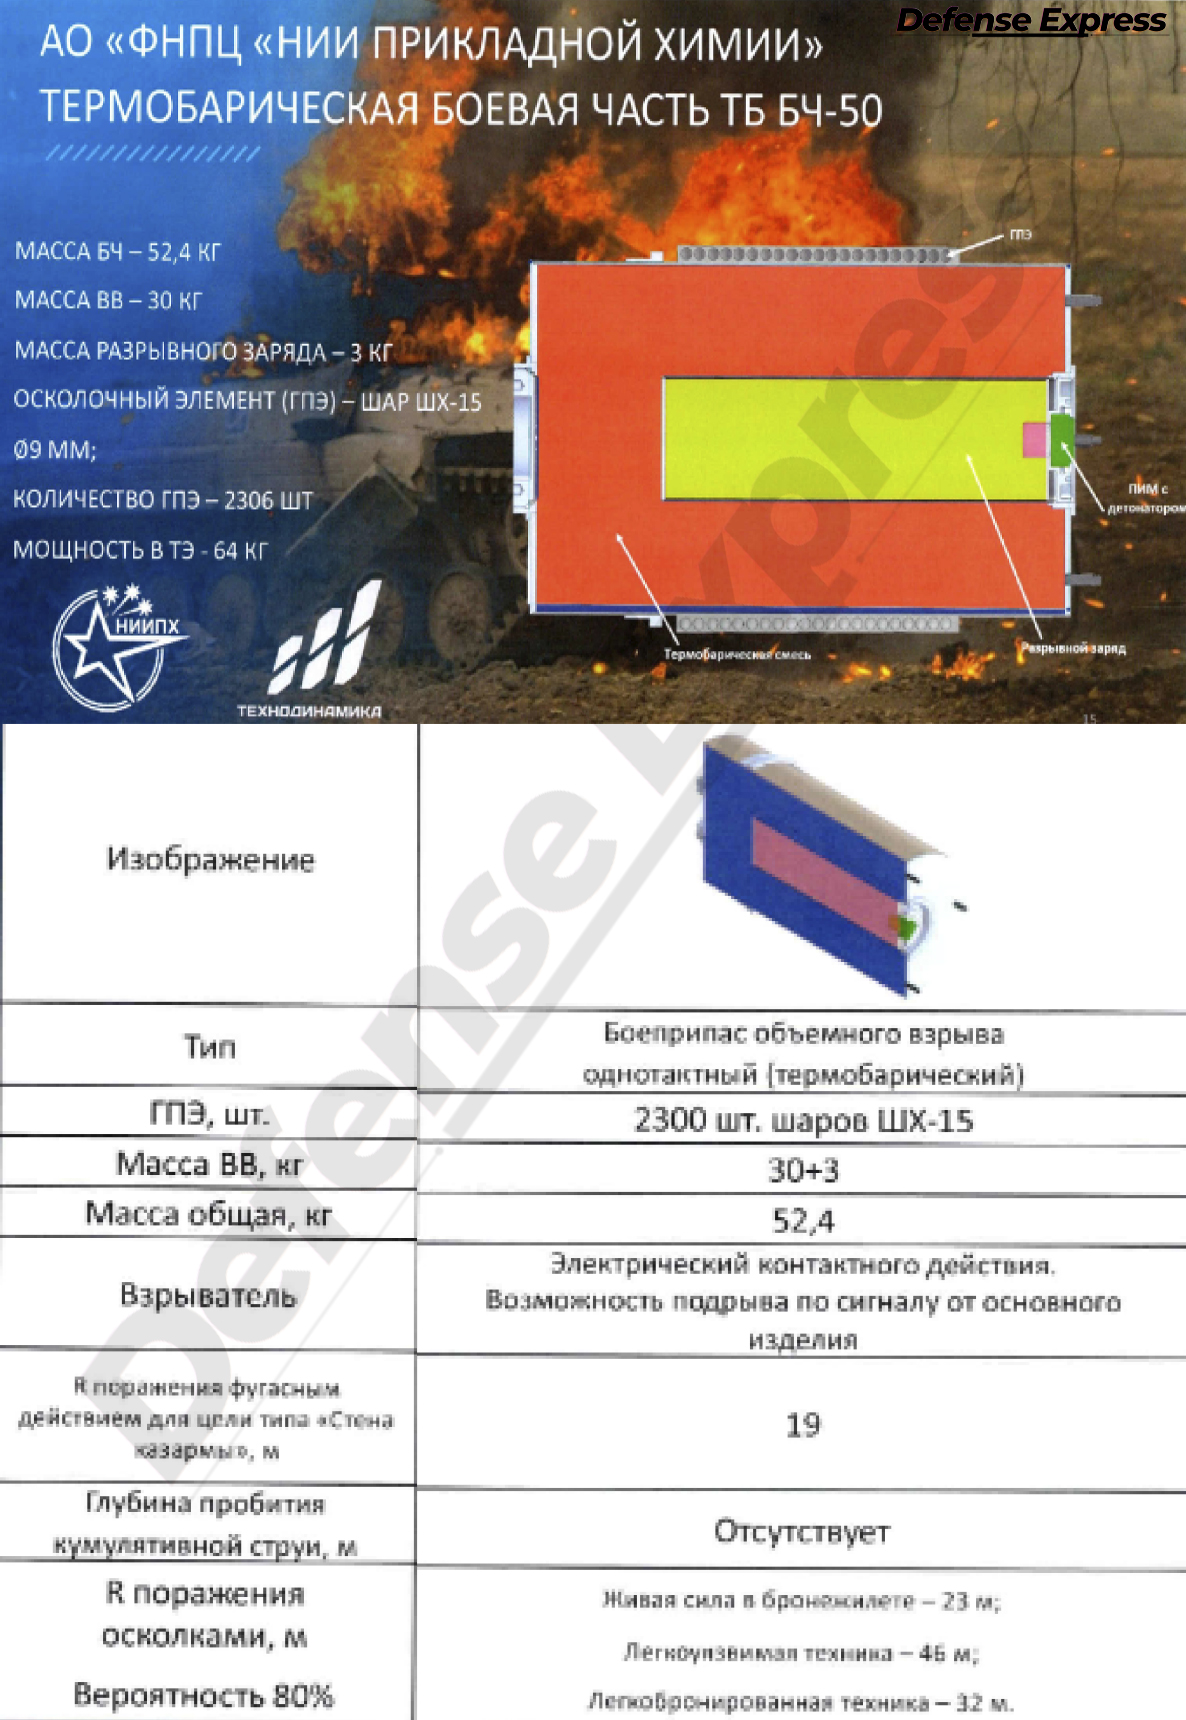 Thermobaric modification of the BCh-50 for Shahed-136 / Defense Express / Shahed-136's New 90-kg Warhead and Other Findings of the Alabuga Data Leak